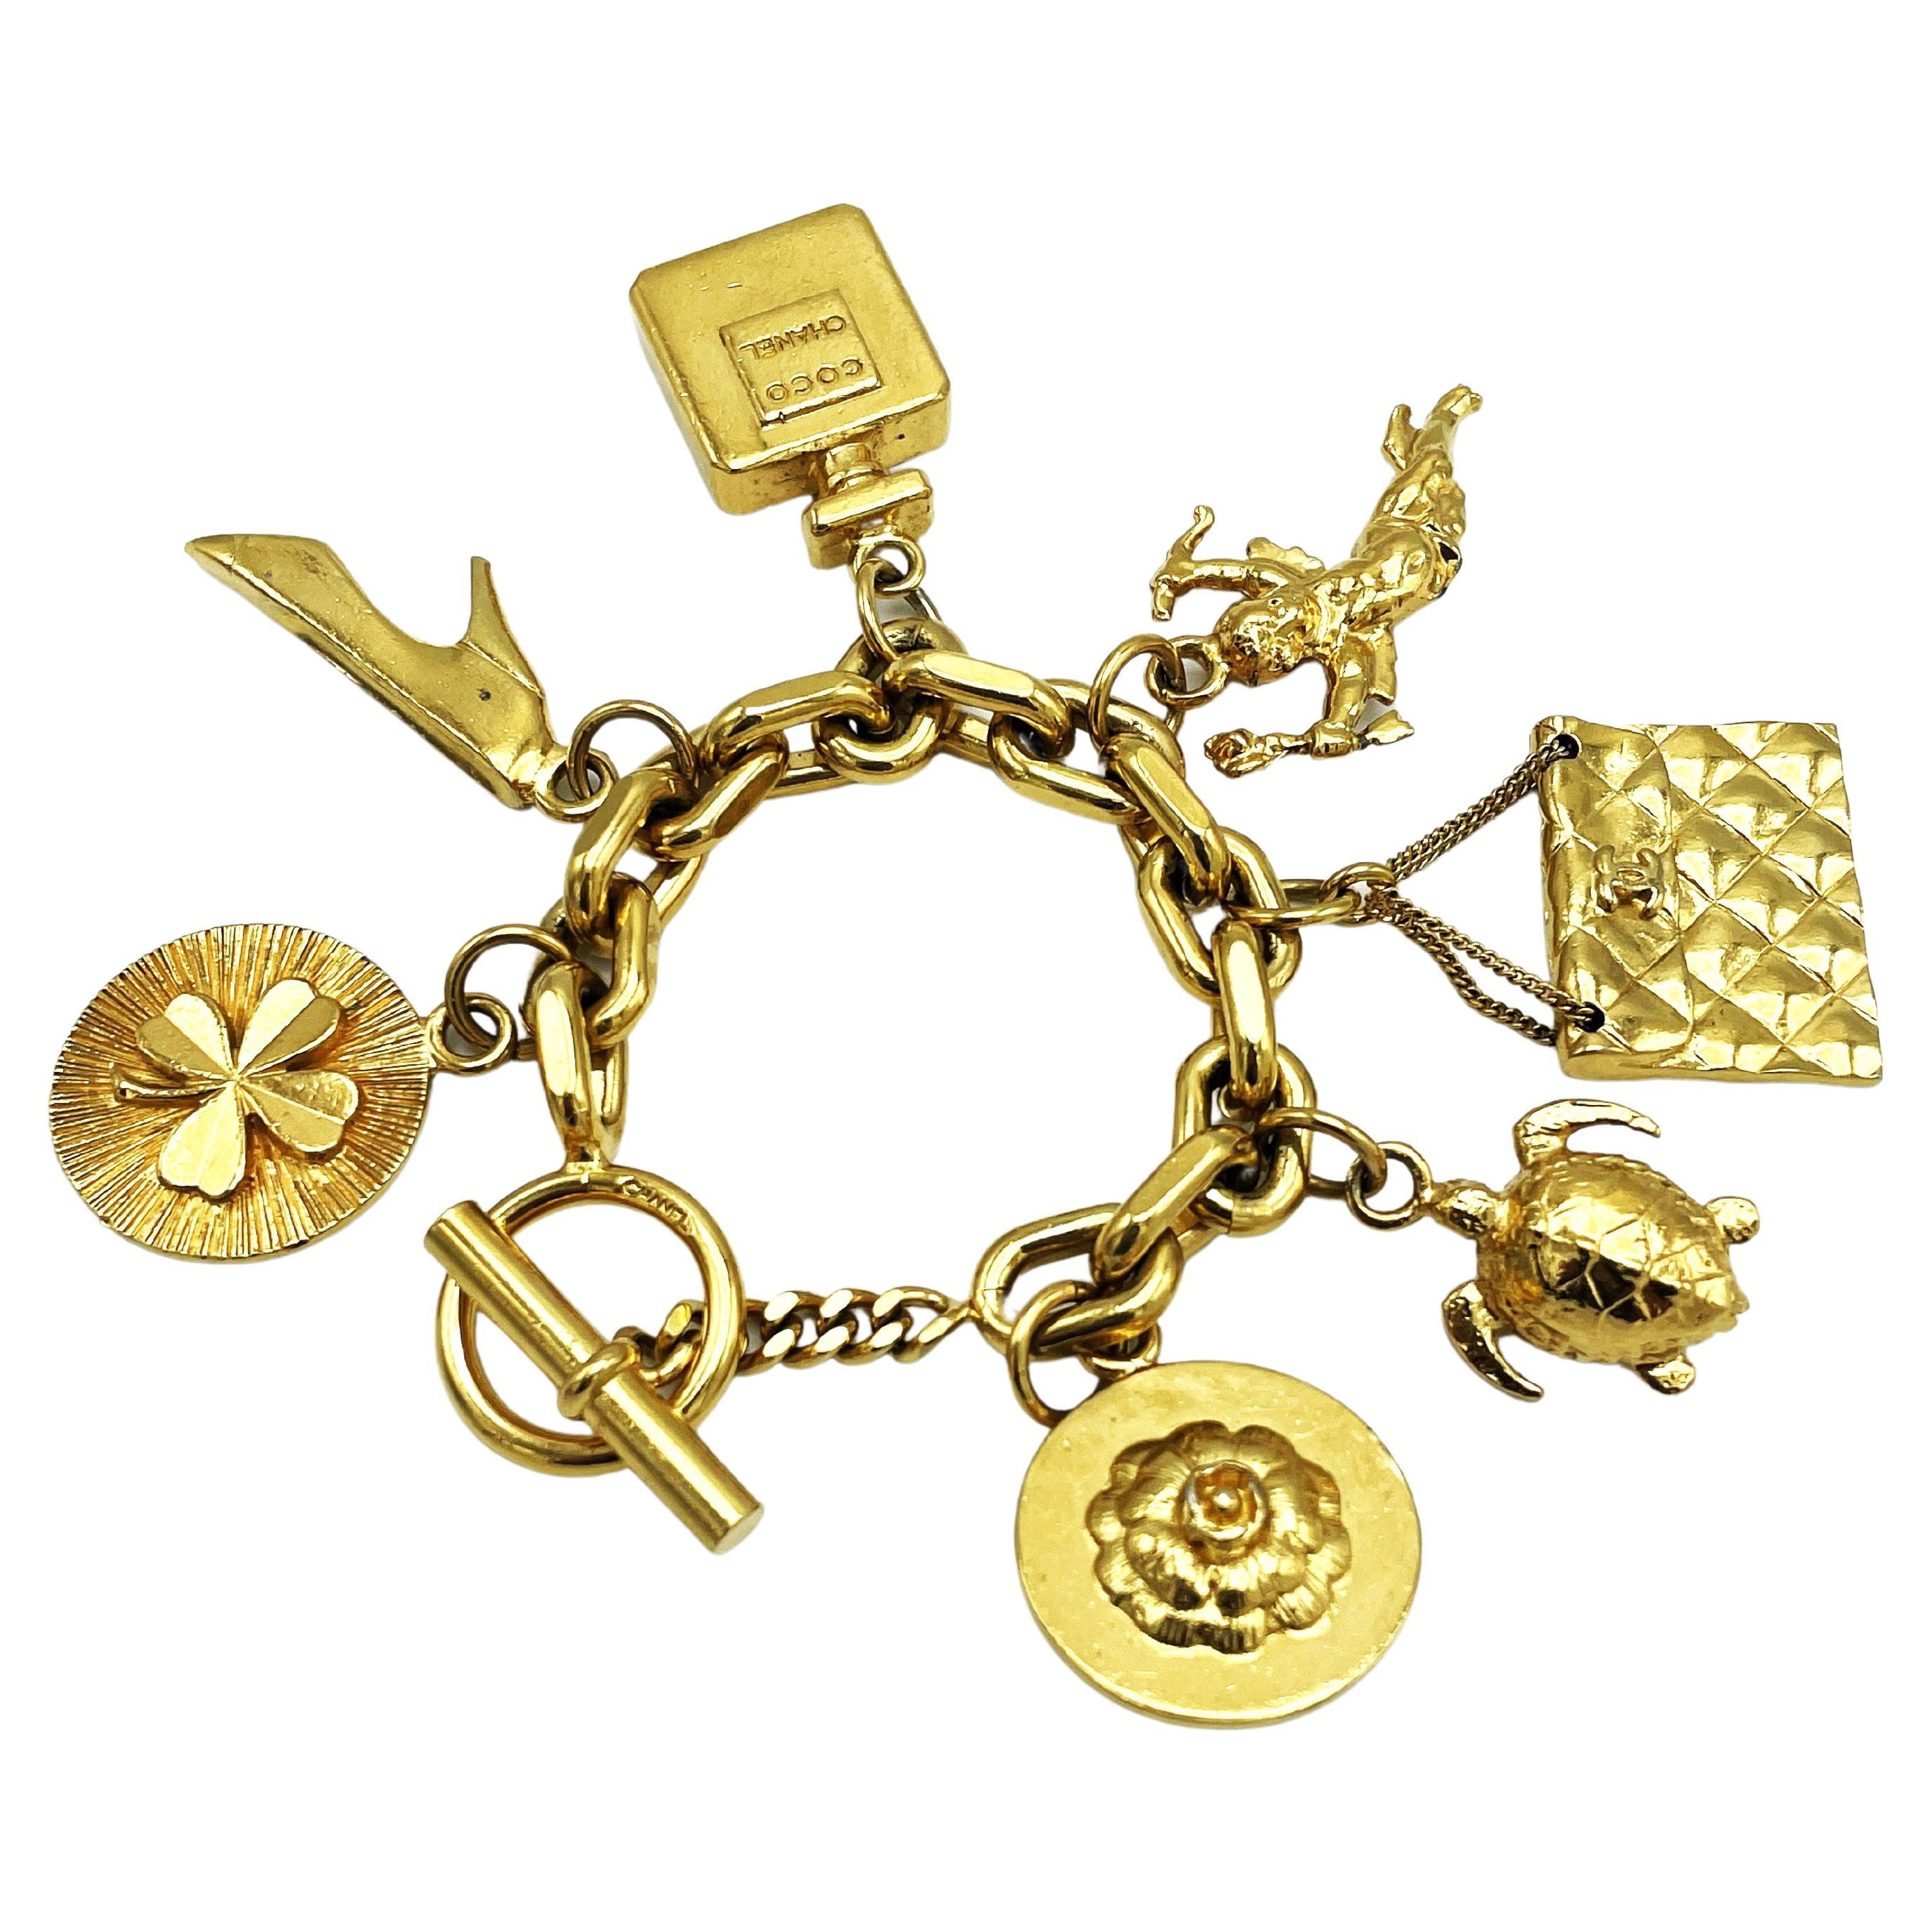 CHANEL lucky charm bracelet with 7 iconic Chanel pendants gold